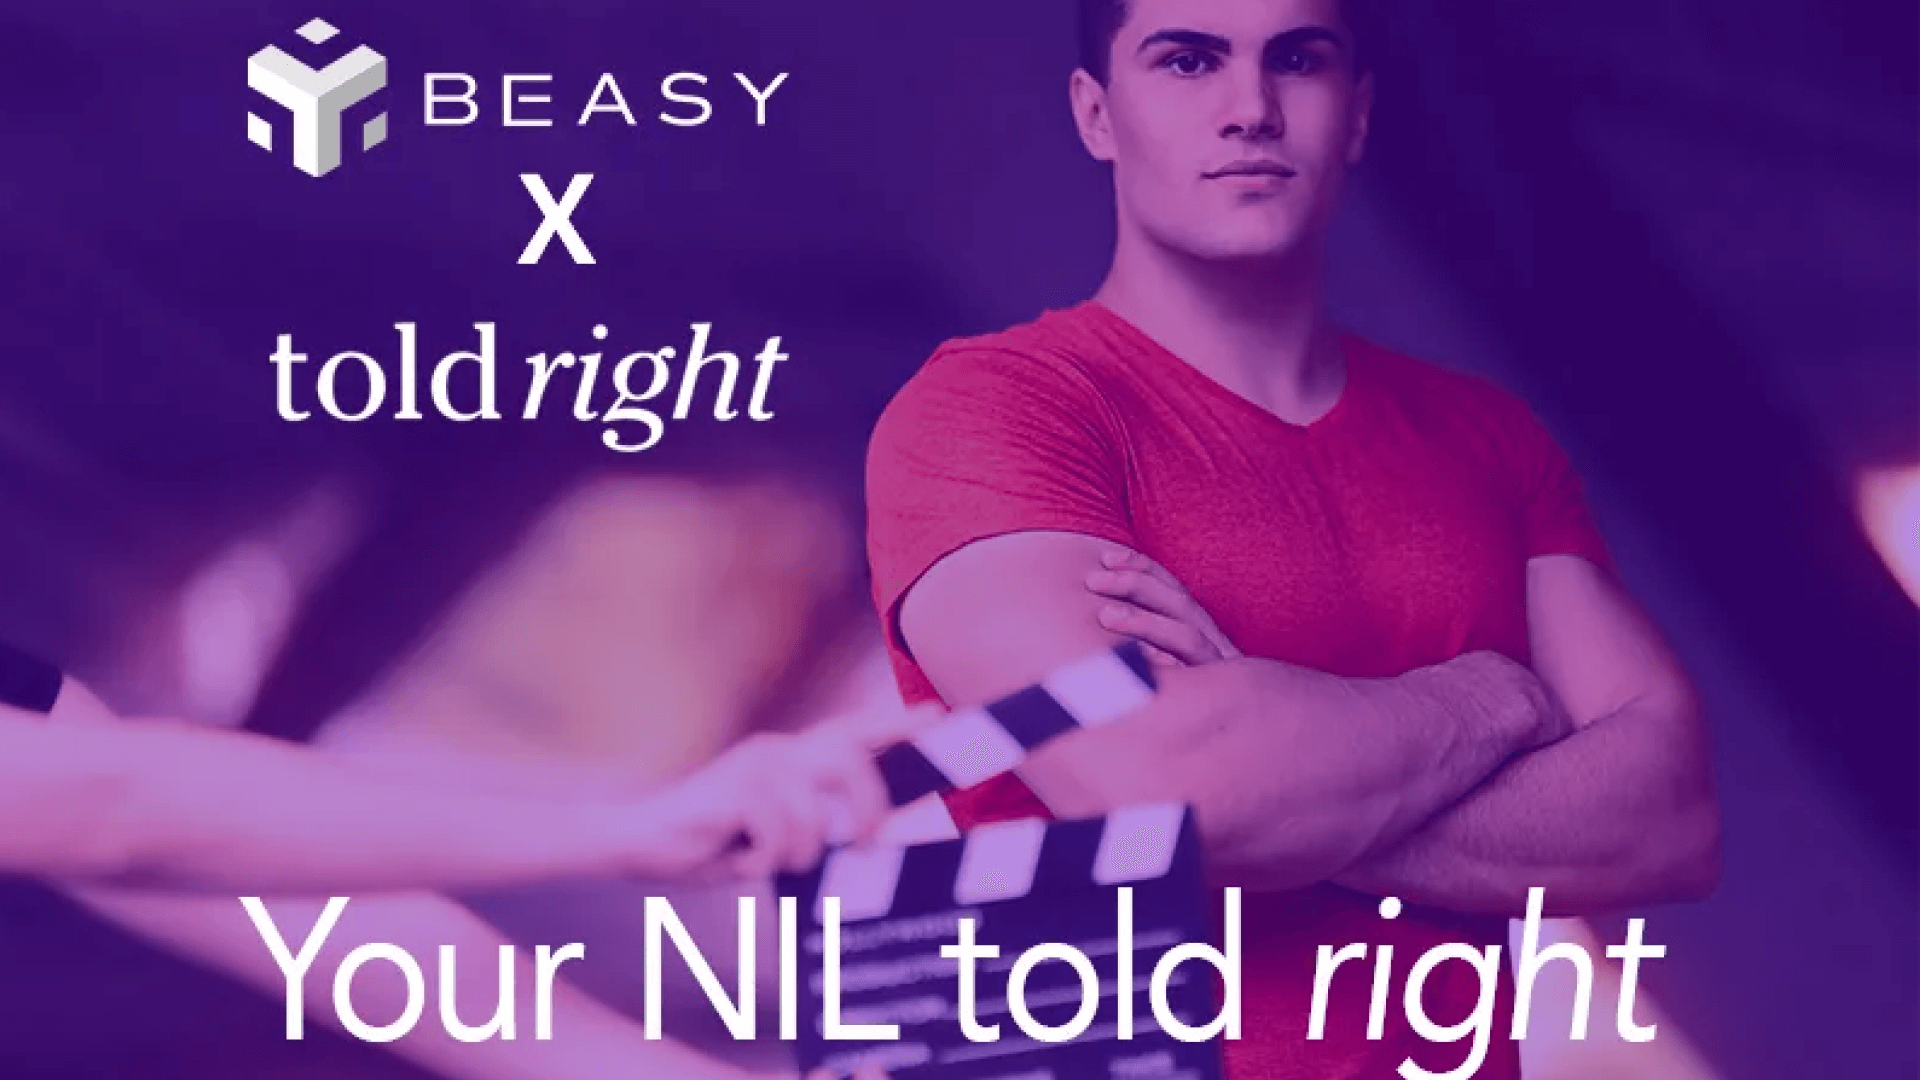 BEASY Partners with Toldright to Provide Digital Asset Creation Services to Athletes, Musicians and Creators of all Types